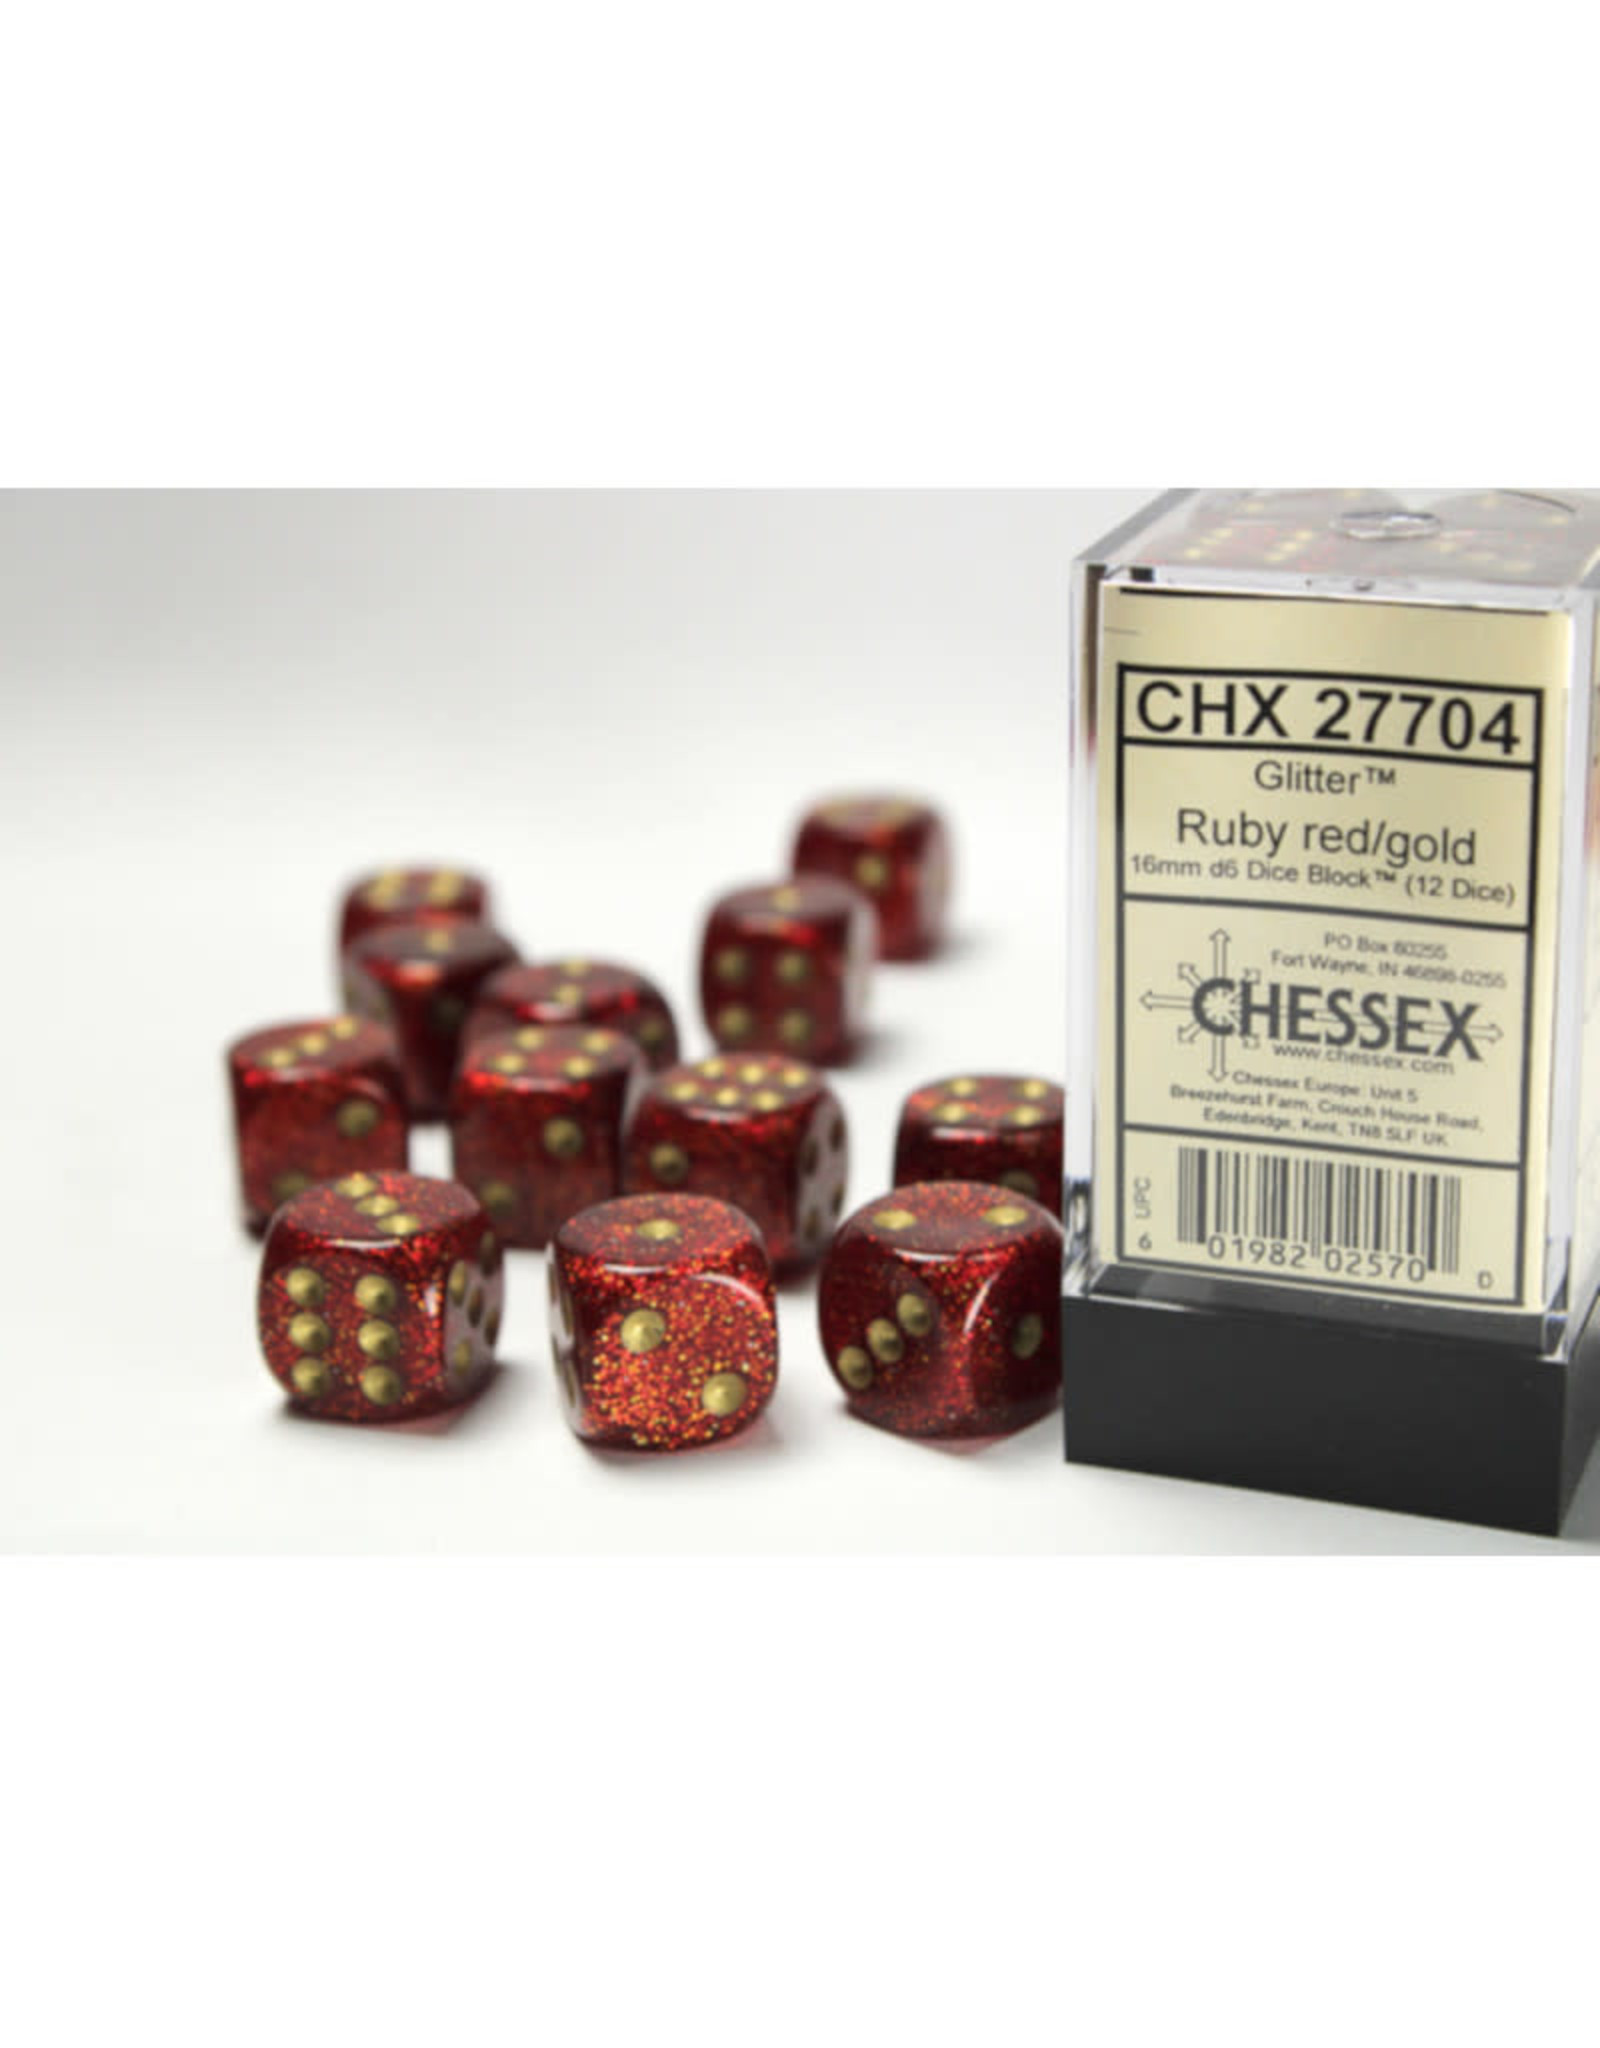 Chessex D6 Dice: 16mm Glitter Ruby/Gold (12)